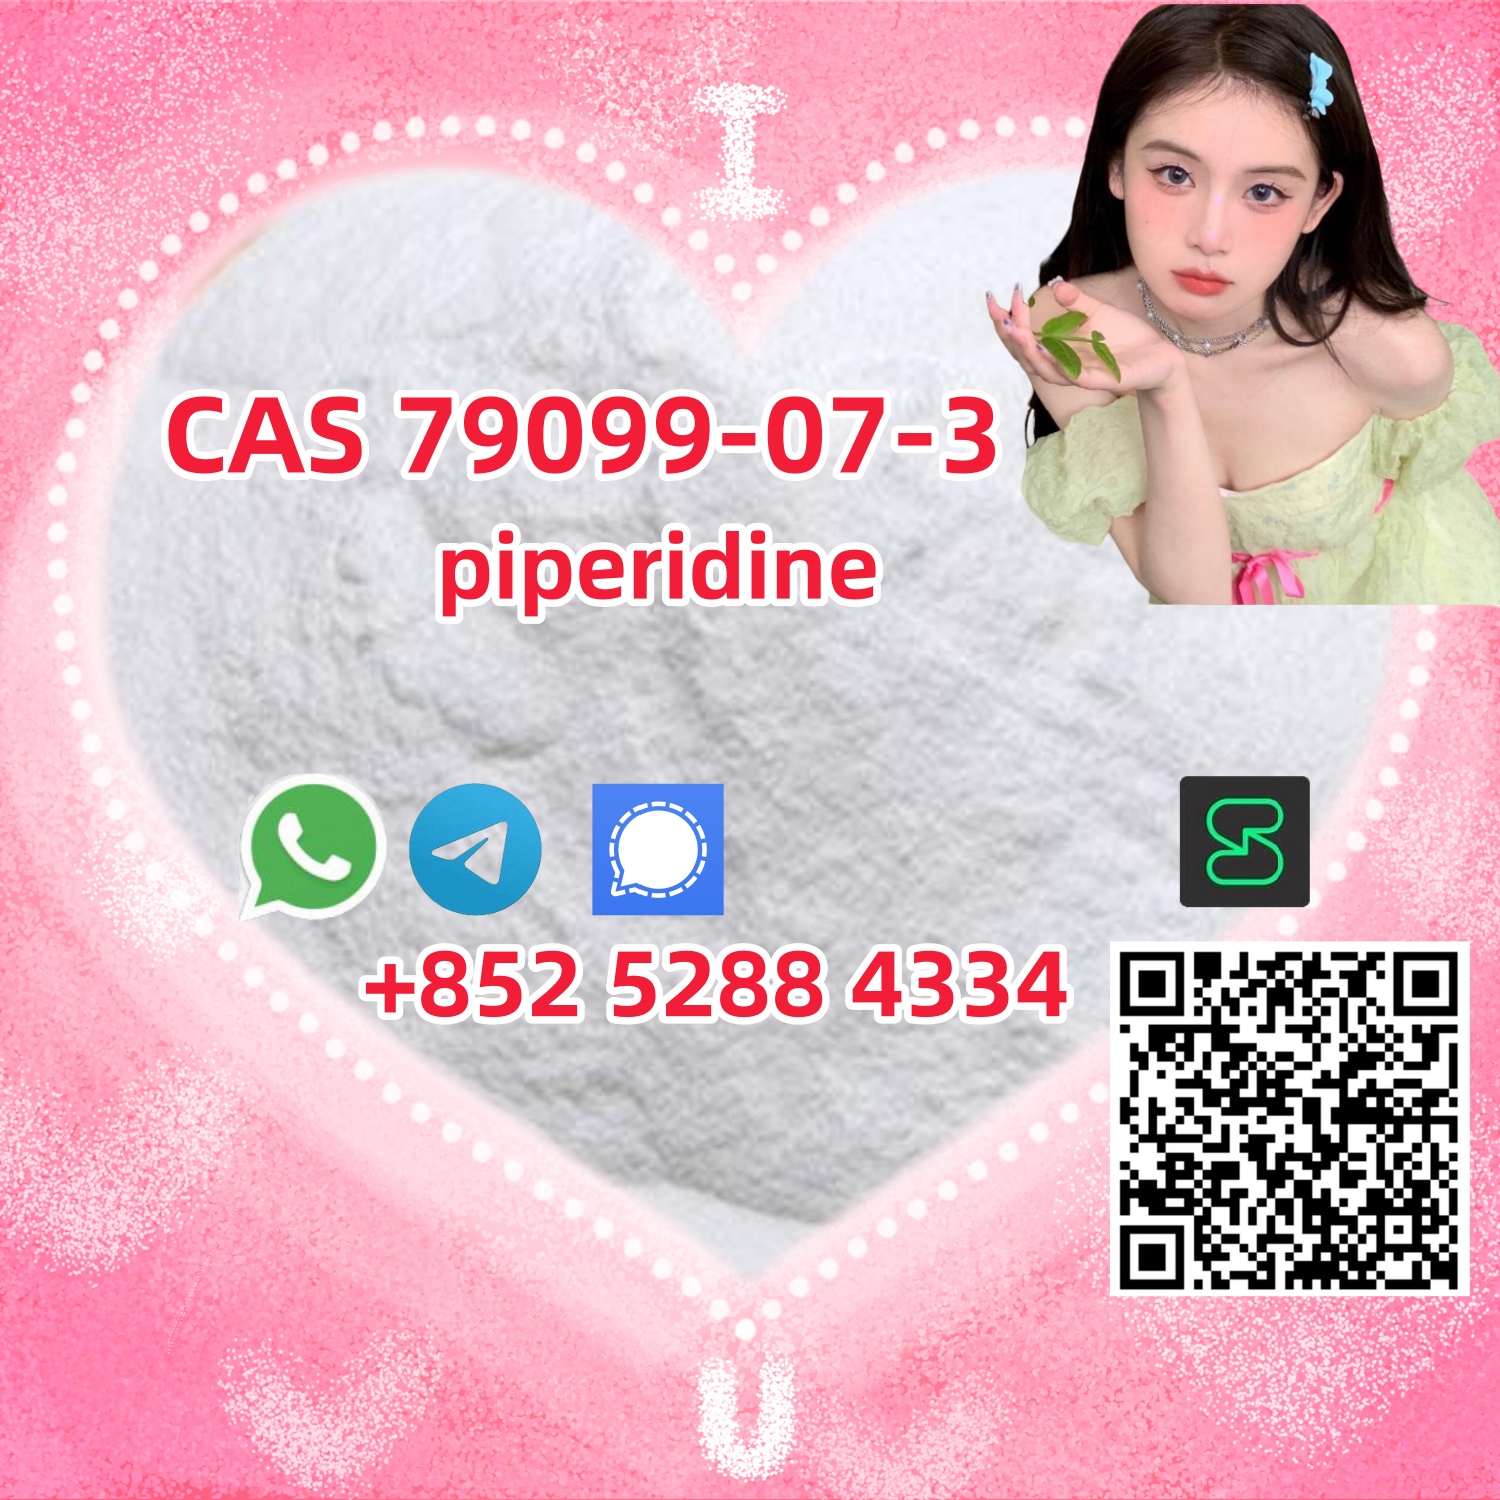 Hot Sell piperidine raw powder 99% white powder CAS 79099-07-3,aaaaa,Others,Free Classifieds,Post Free Ads,77traders.com